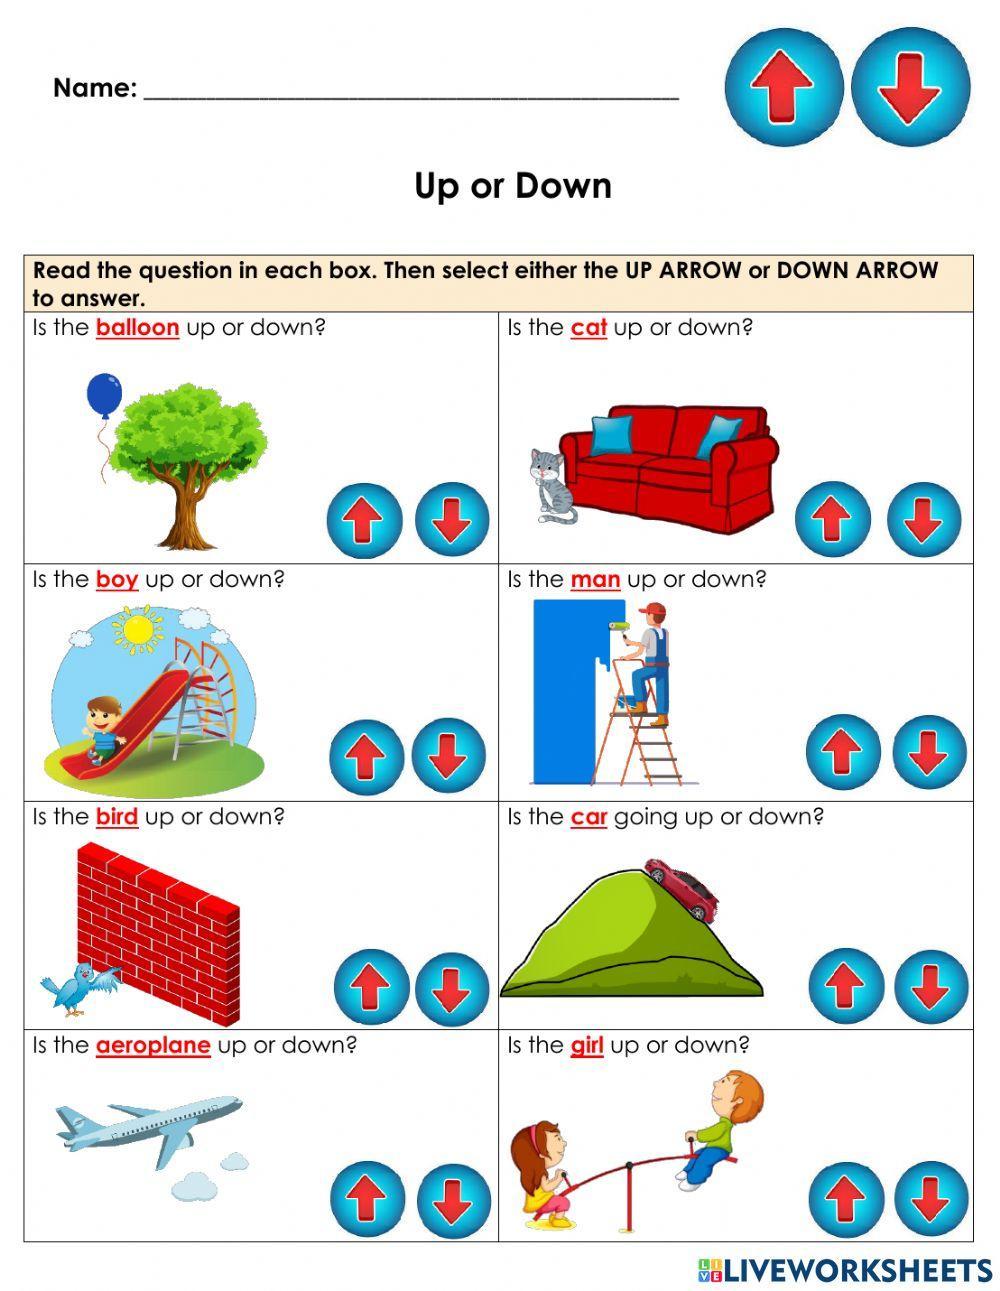 Maths Concepts: Up or Down